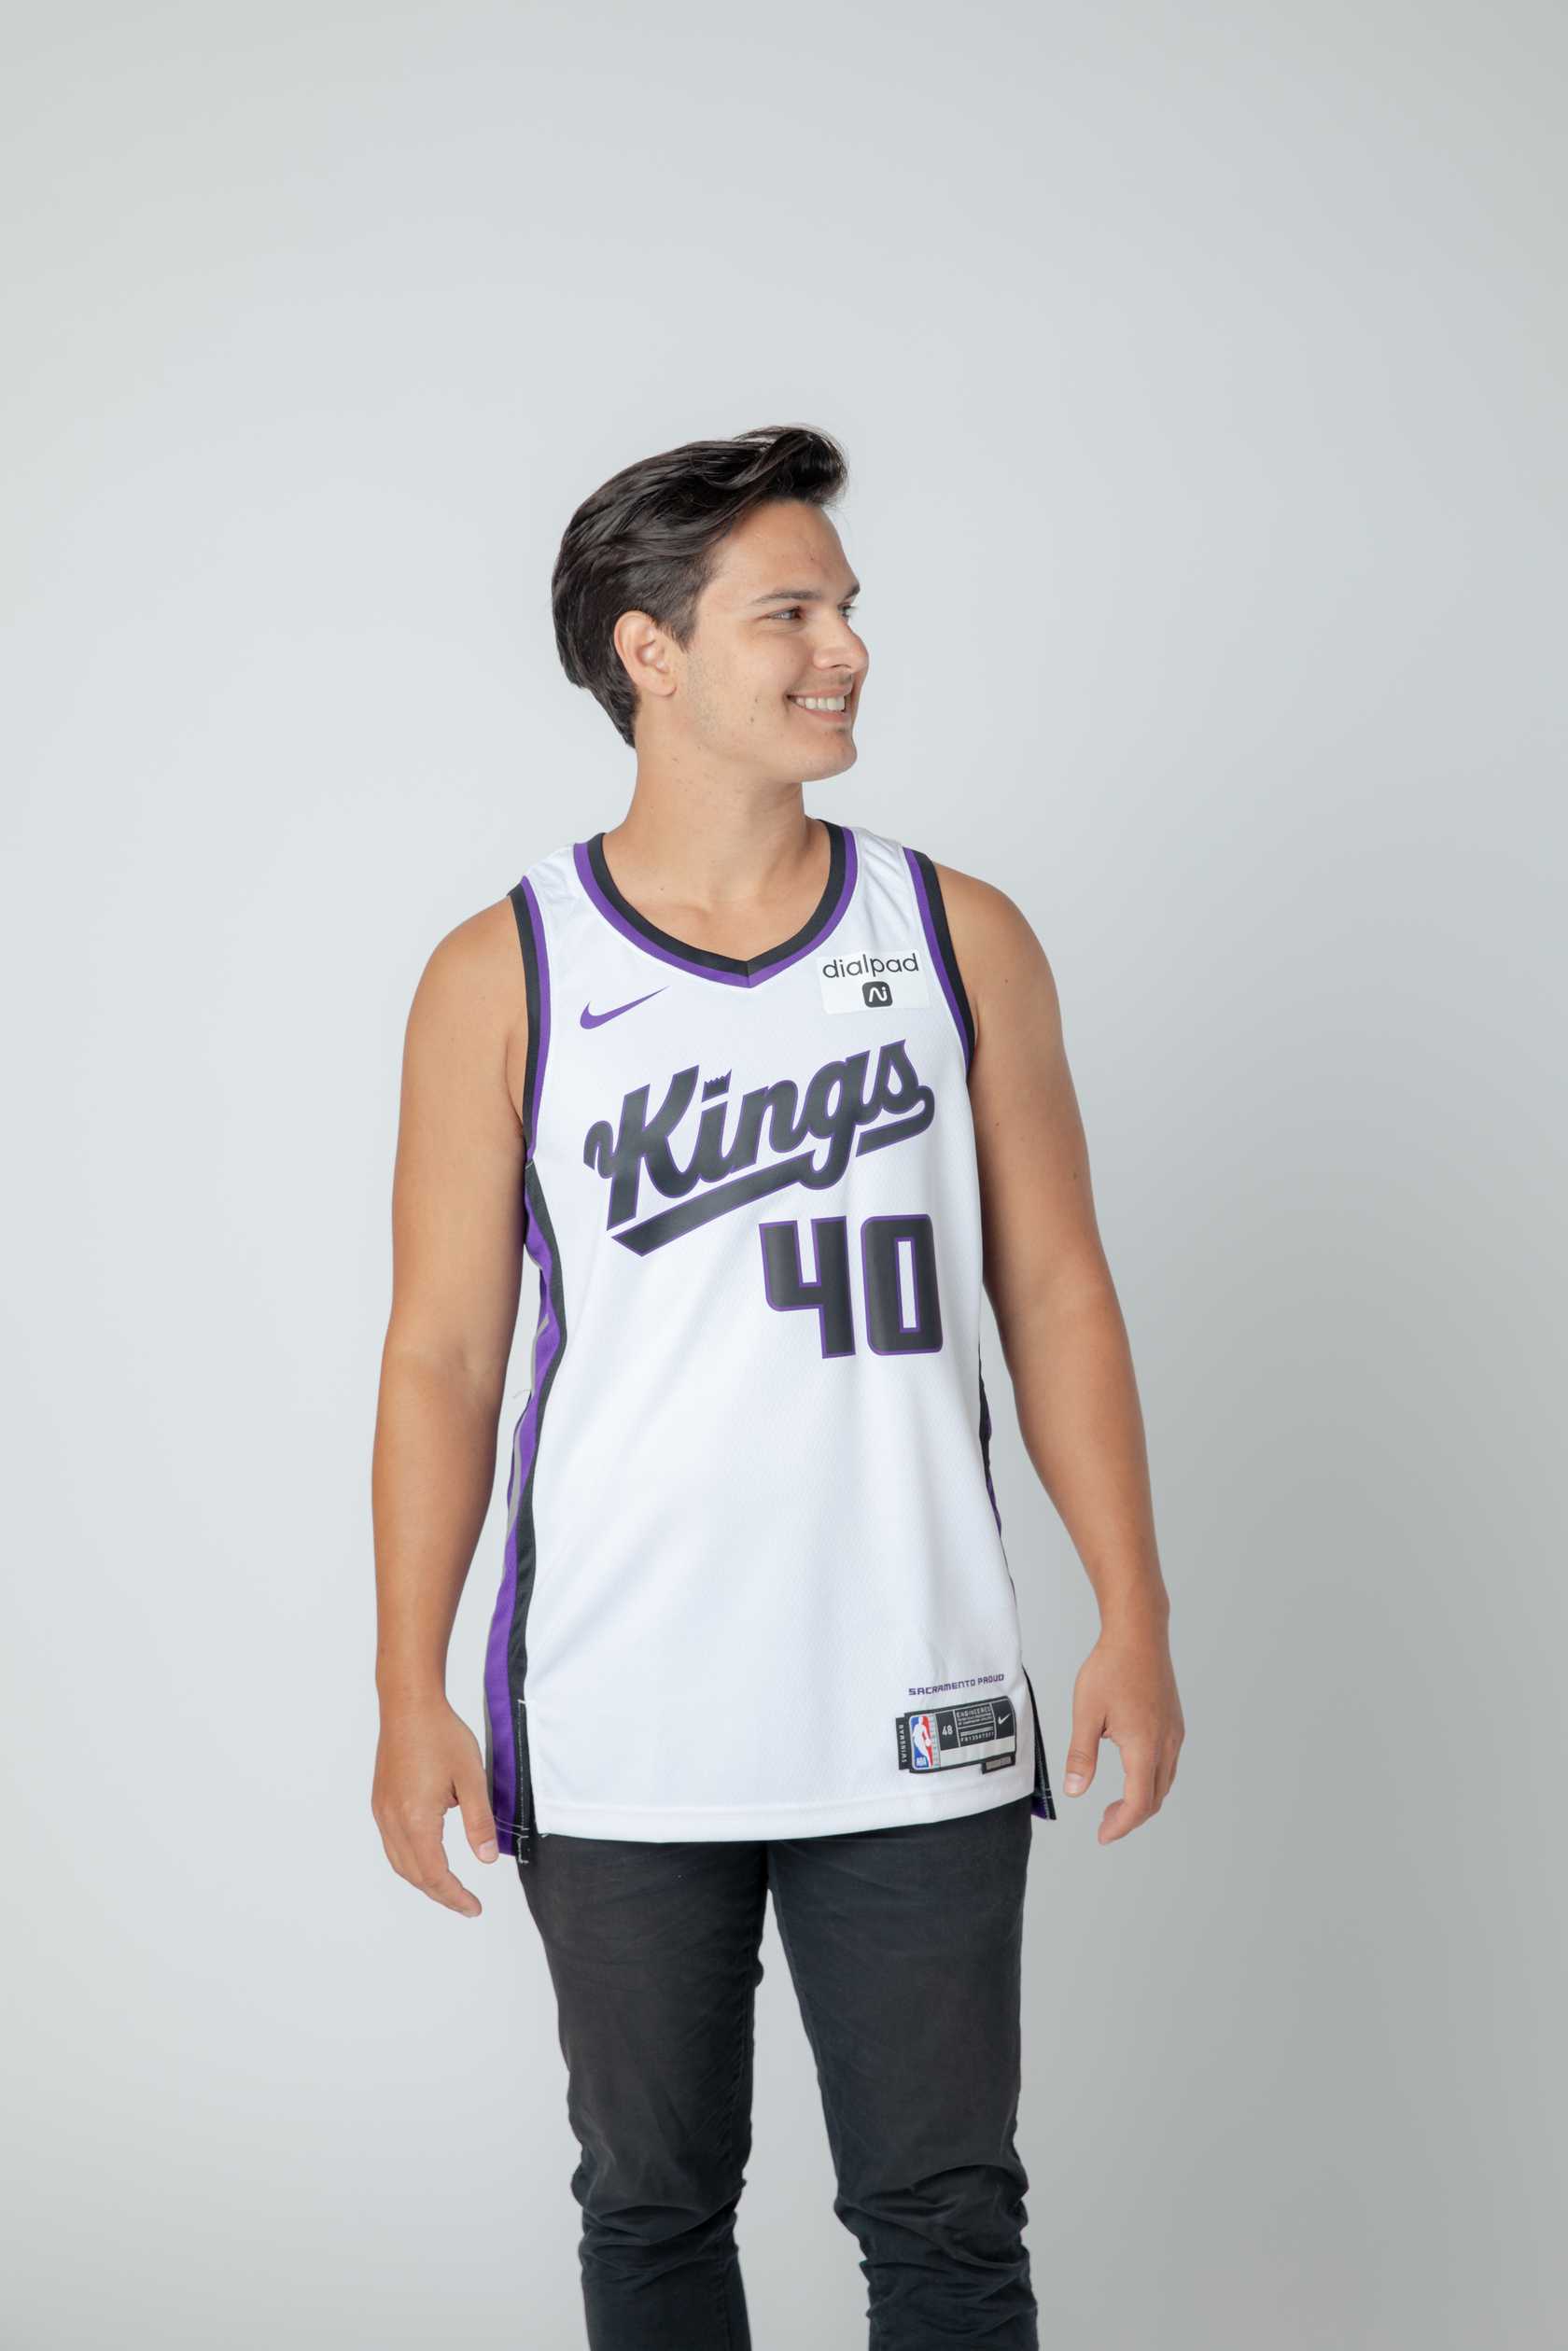 Sacramento Kings - Get your first look at the team's City Edition